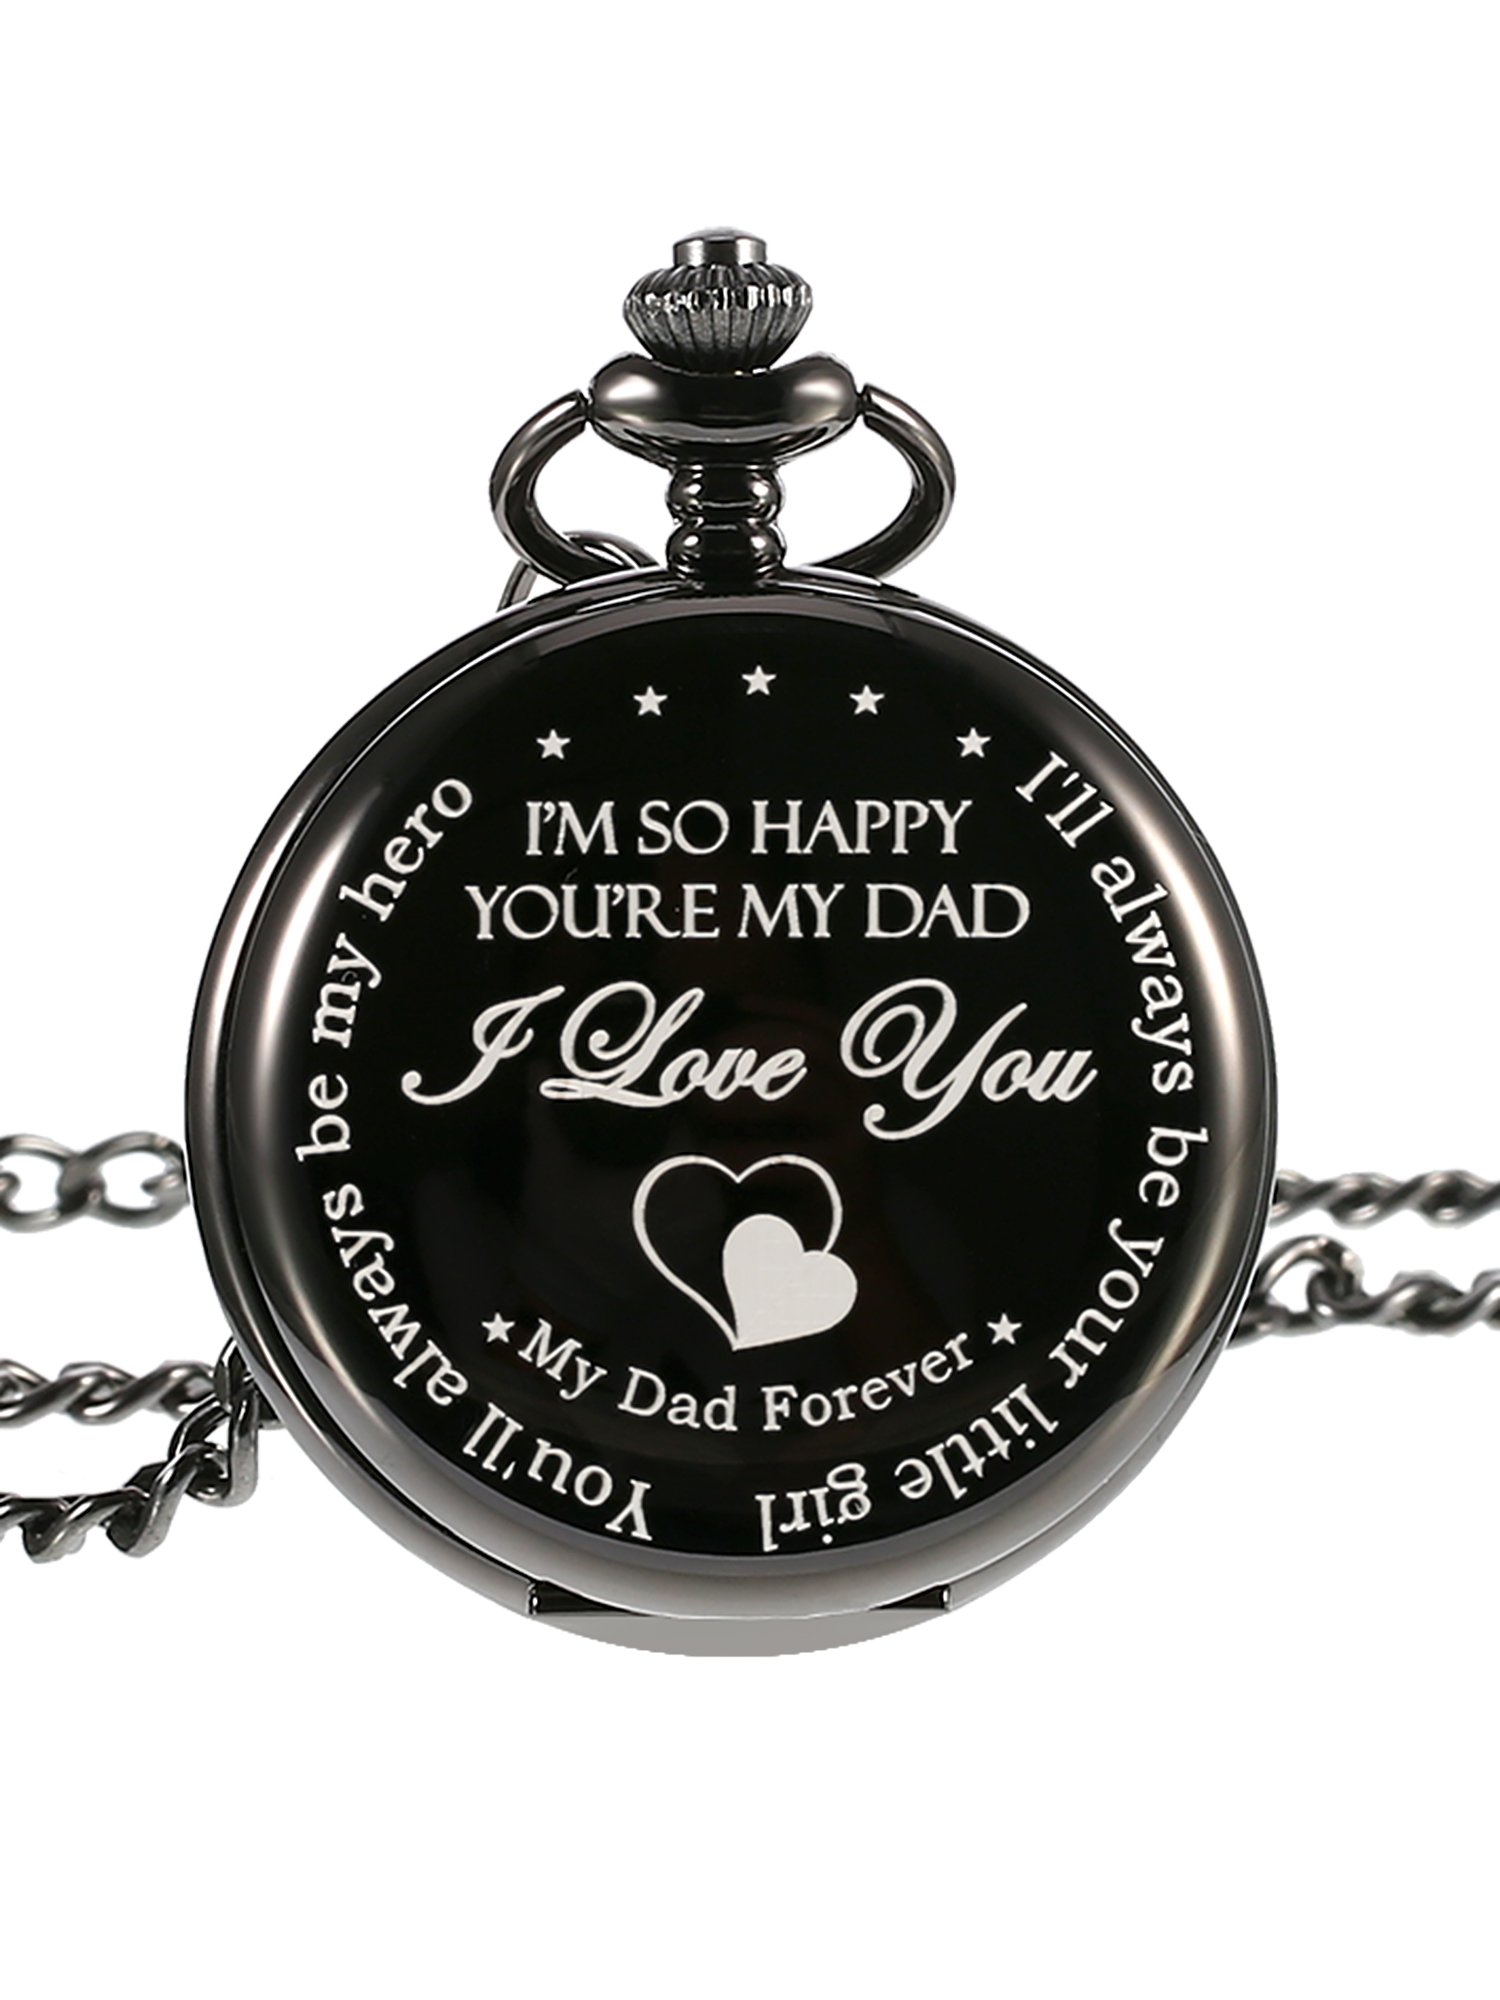 Hicarer Pocket Watch Father's Day Gift-I'll Always Be Your Little Girl, You'll Always Be My, Christmas Birthday Gift for Dad Father (Dad Gifts, White Dial)